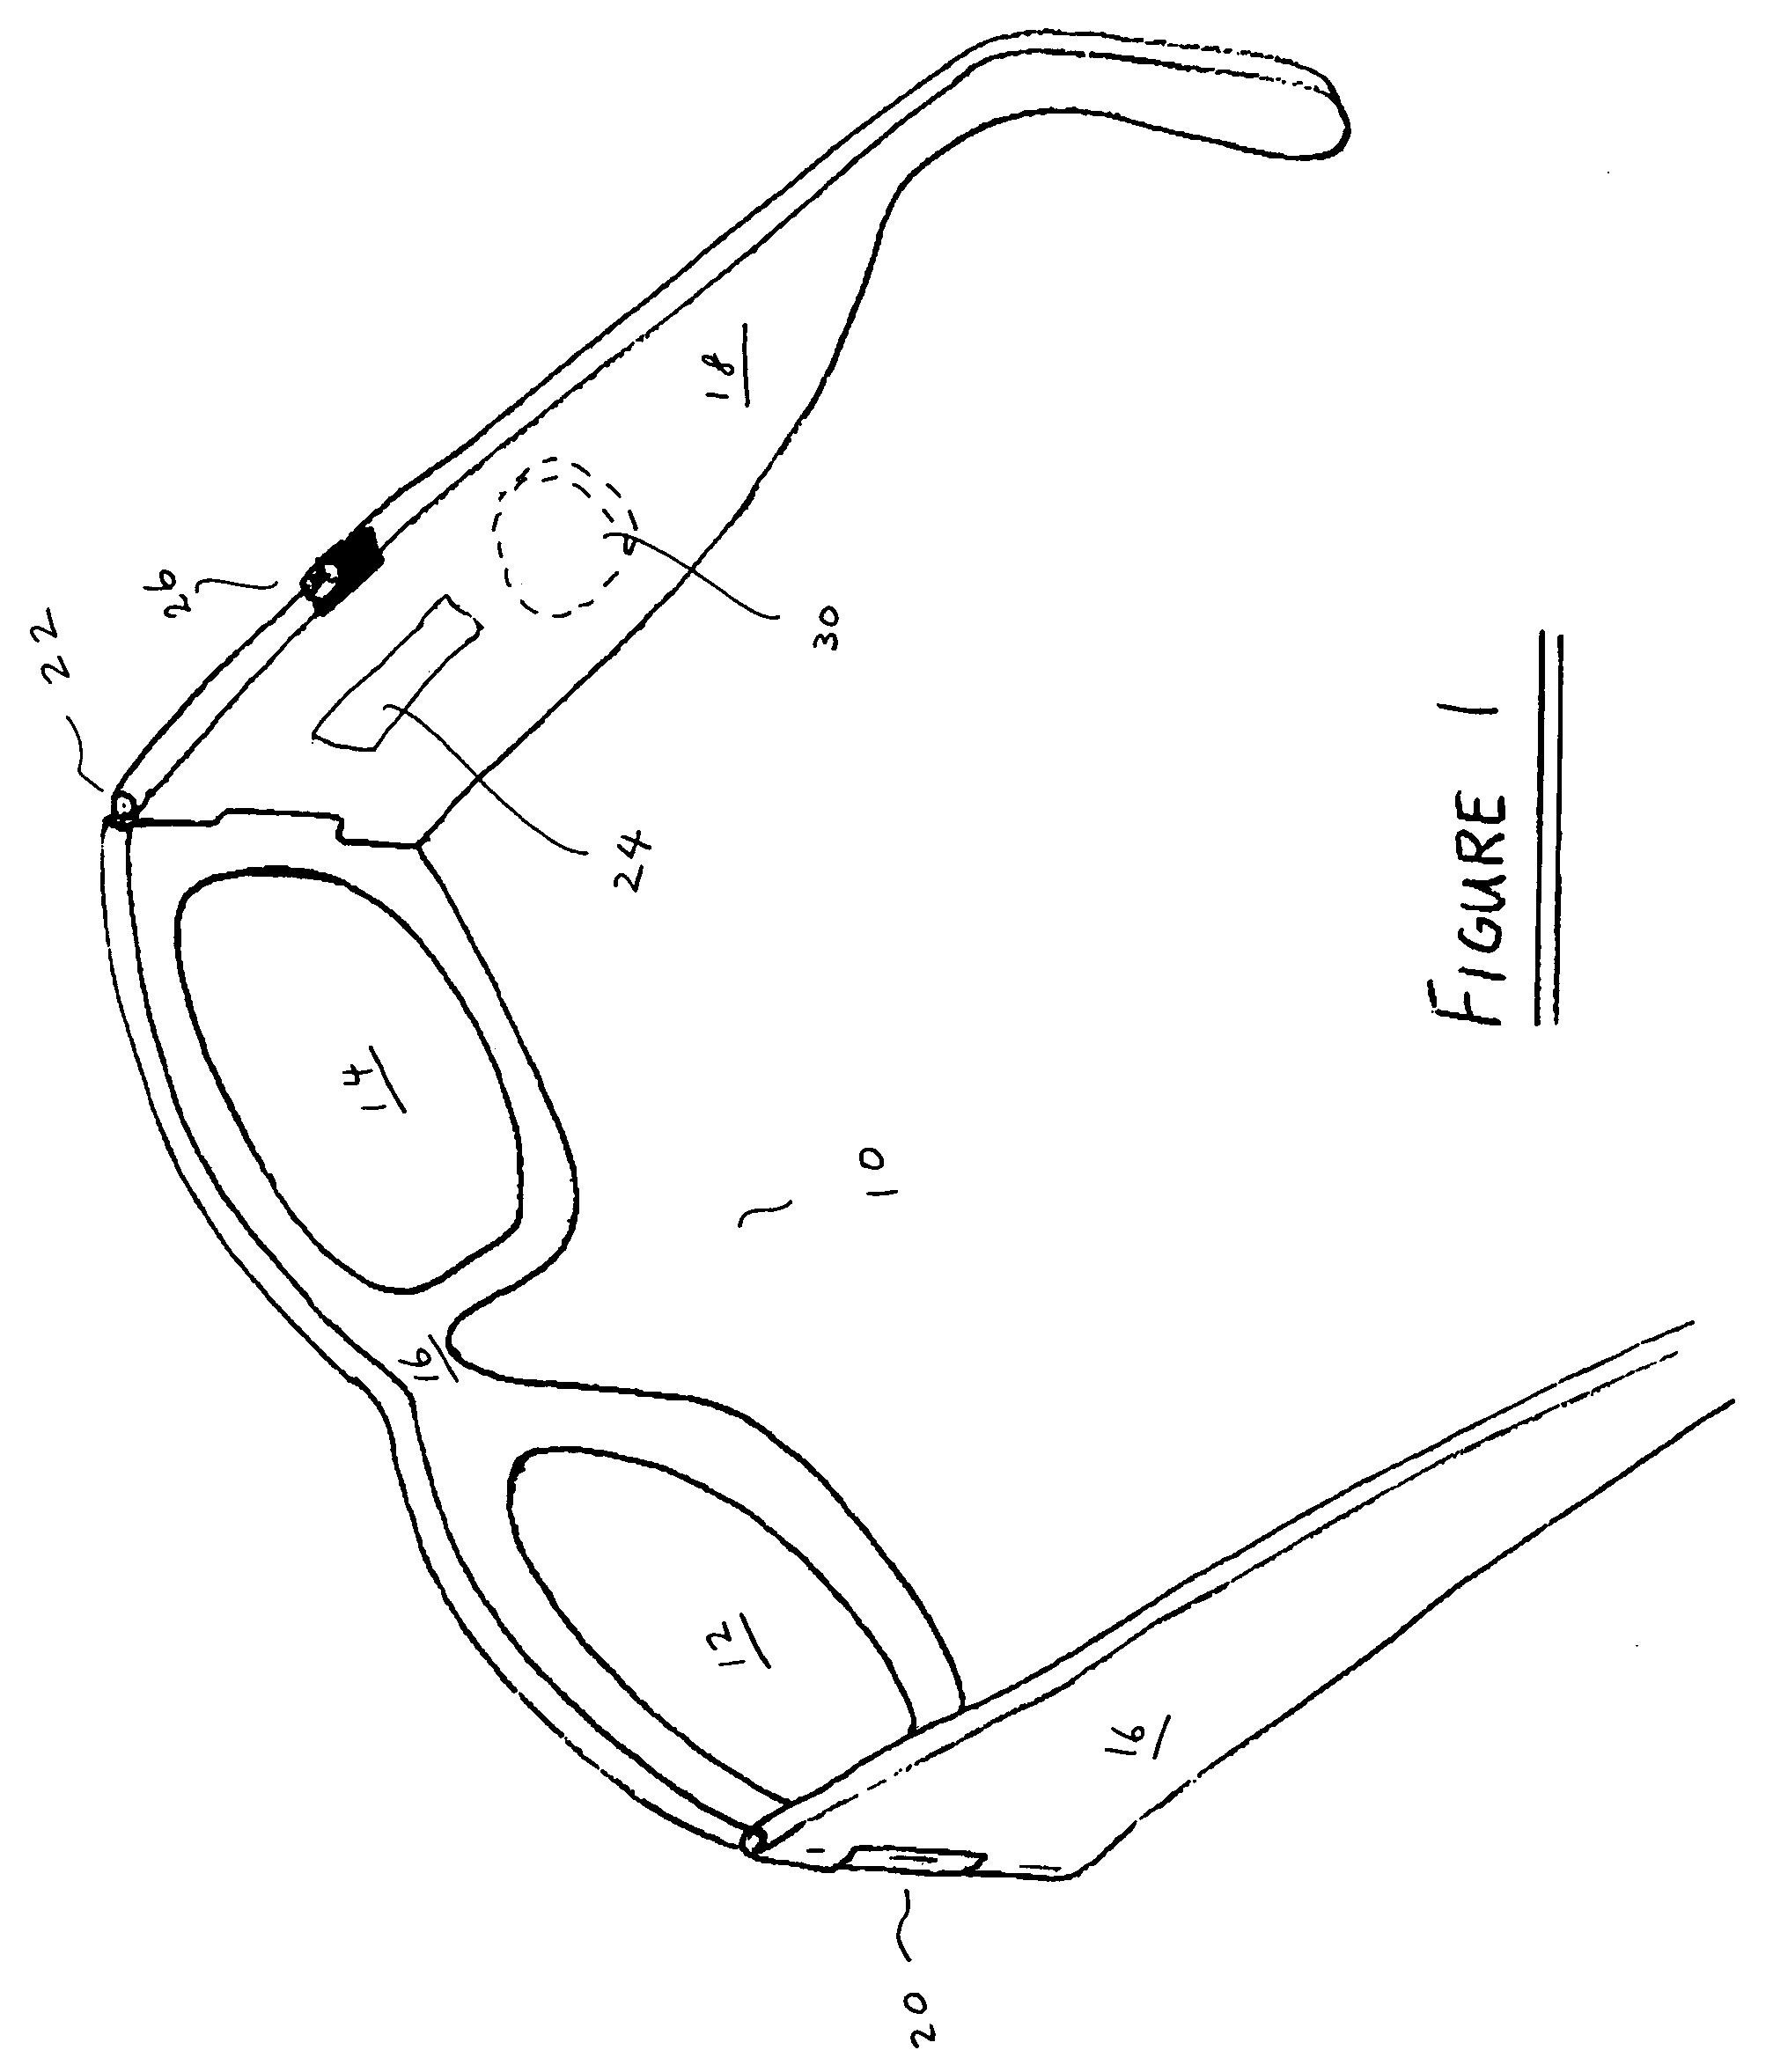 Eyeglasses with a clock or other electrical component